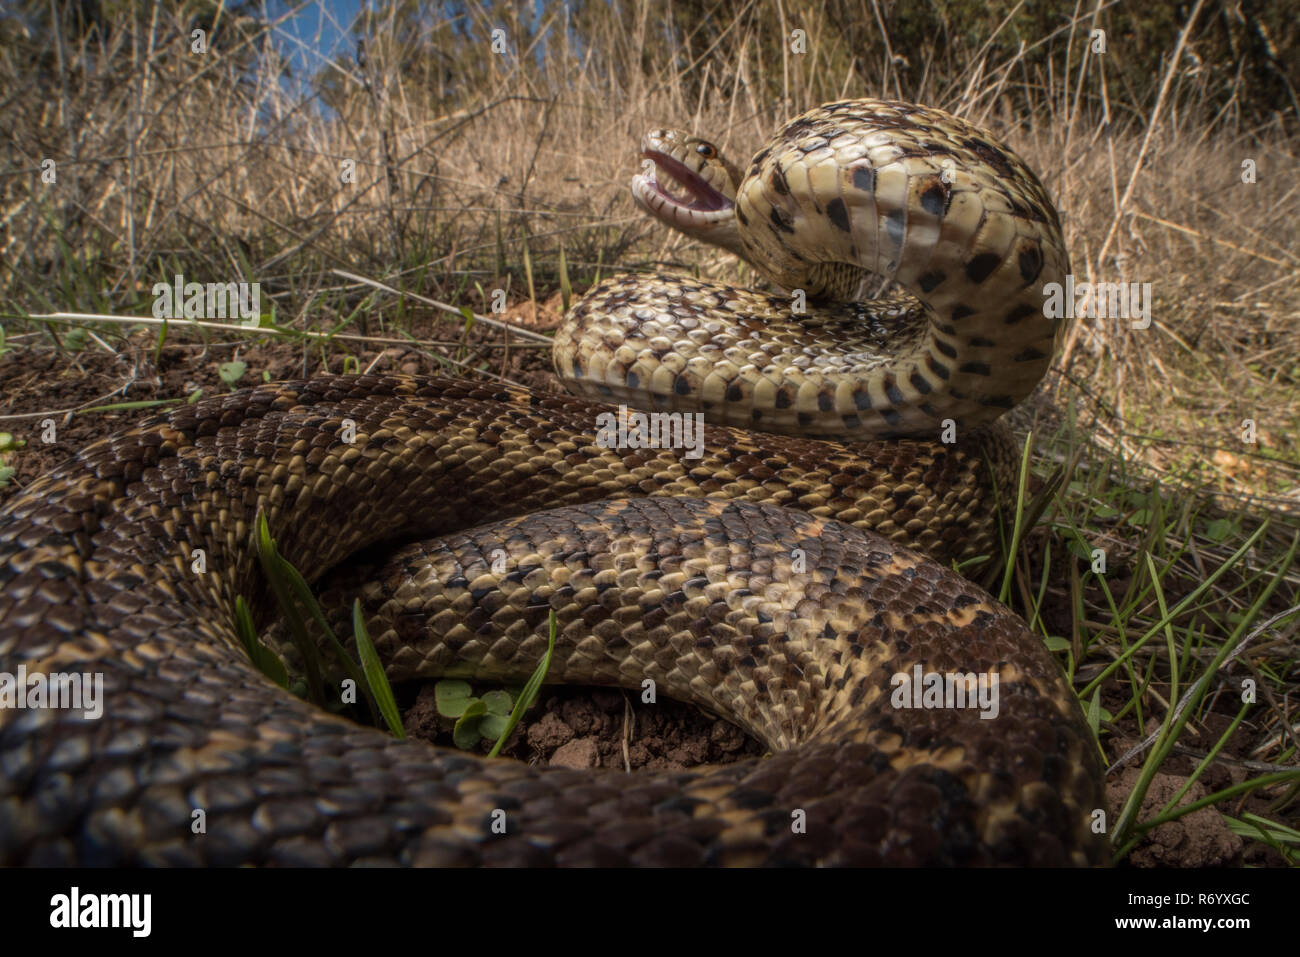 A extremely angry Pacific gopher snake (Pituophis catenifer catenifer) hissing and lunging at the camera in order to scare the photographer off. Stock Photo